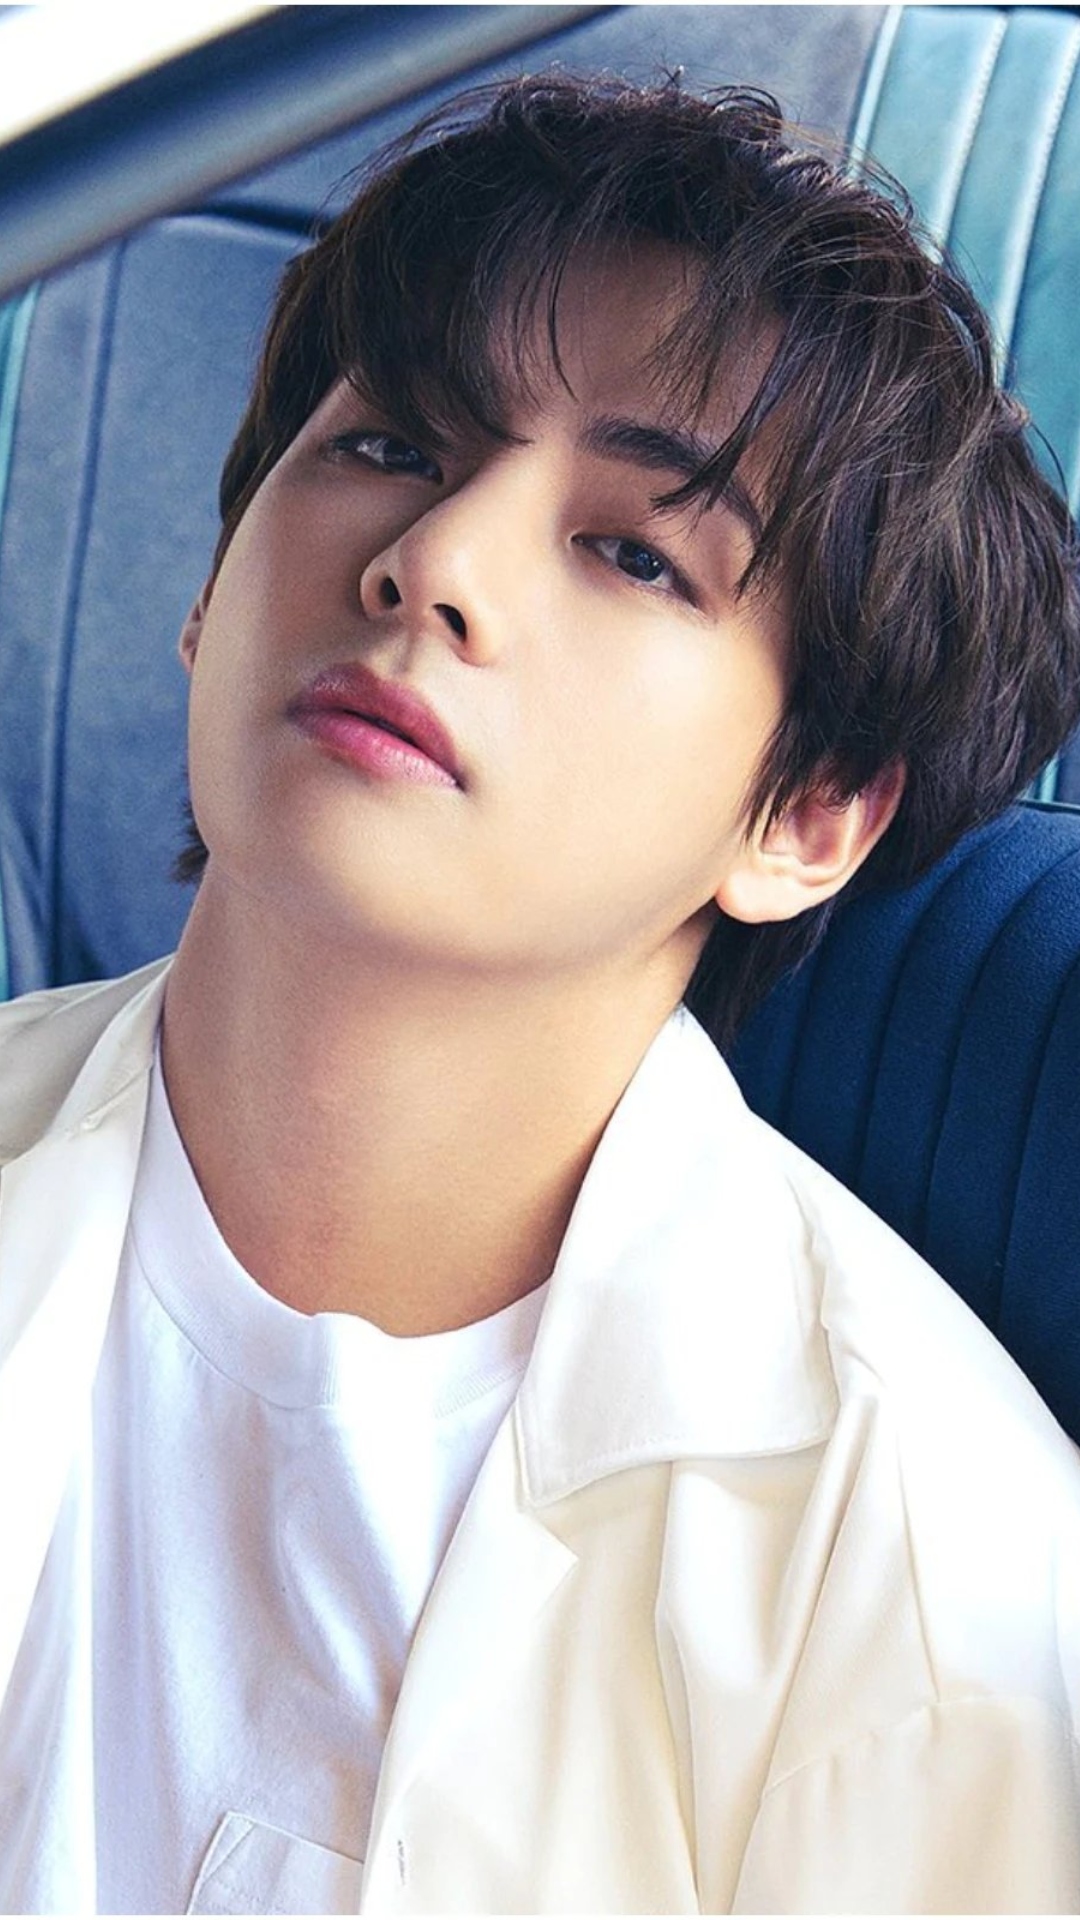 BTS V aka Kim Taehyung in Cannes 2023: BTS Member to Make His